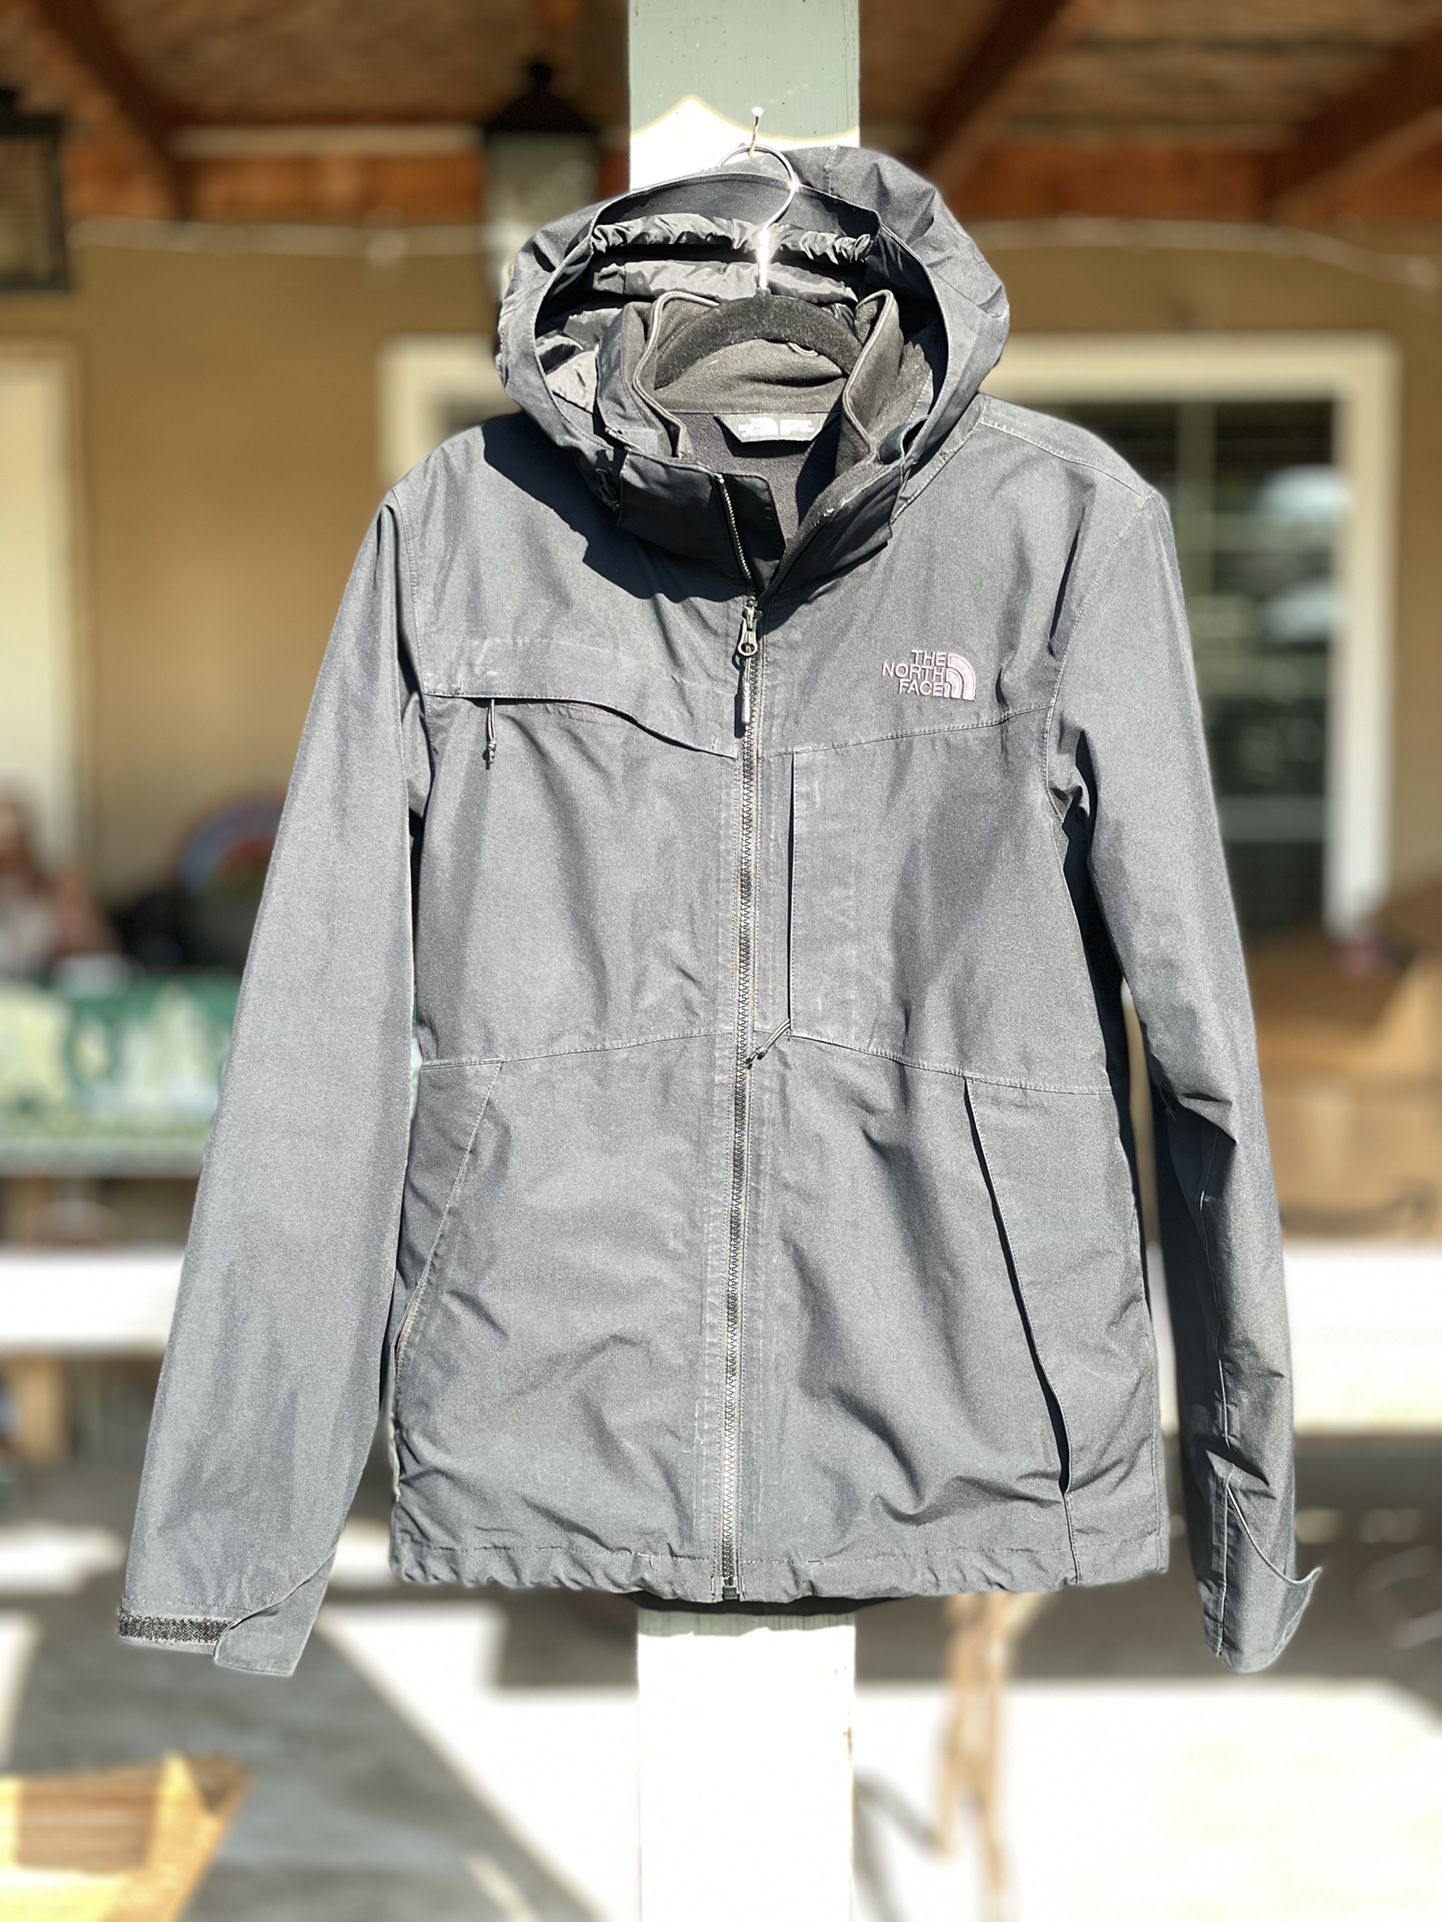 The North Face Condor Triclimate Jacket Black Small